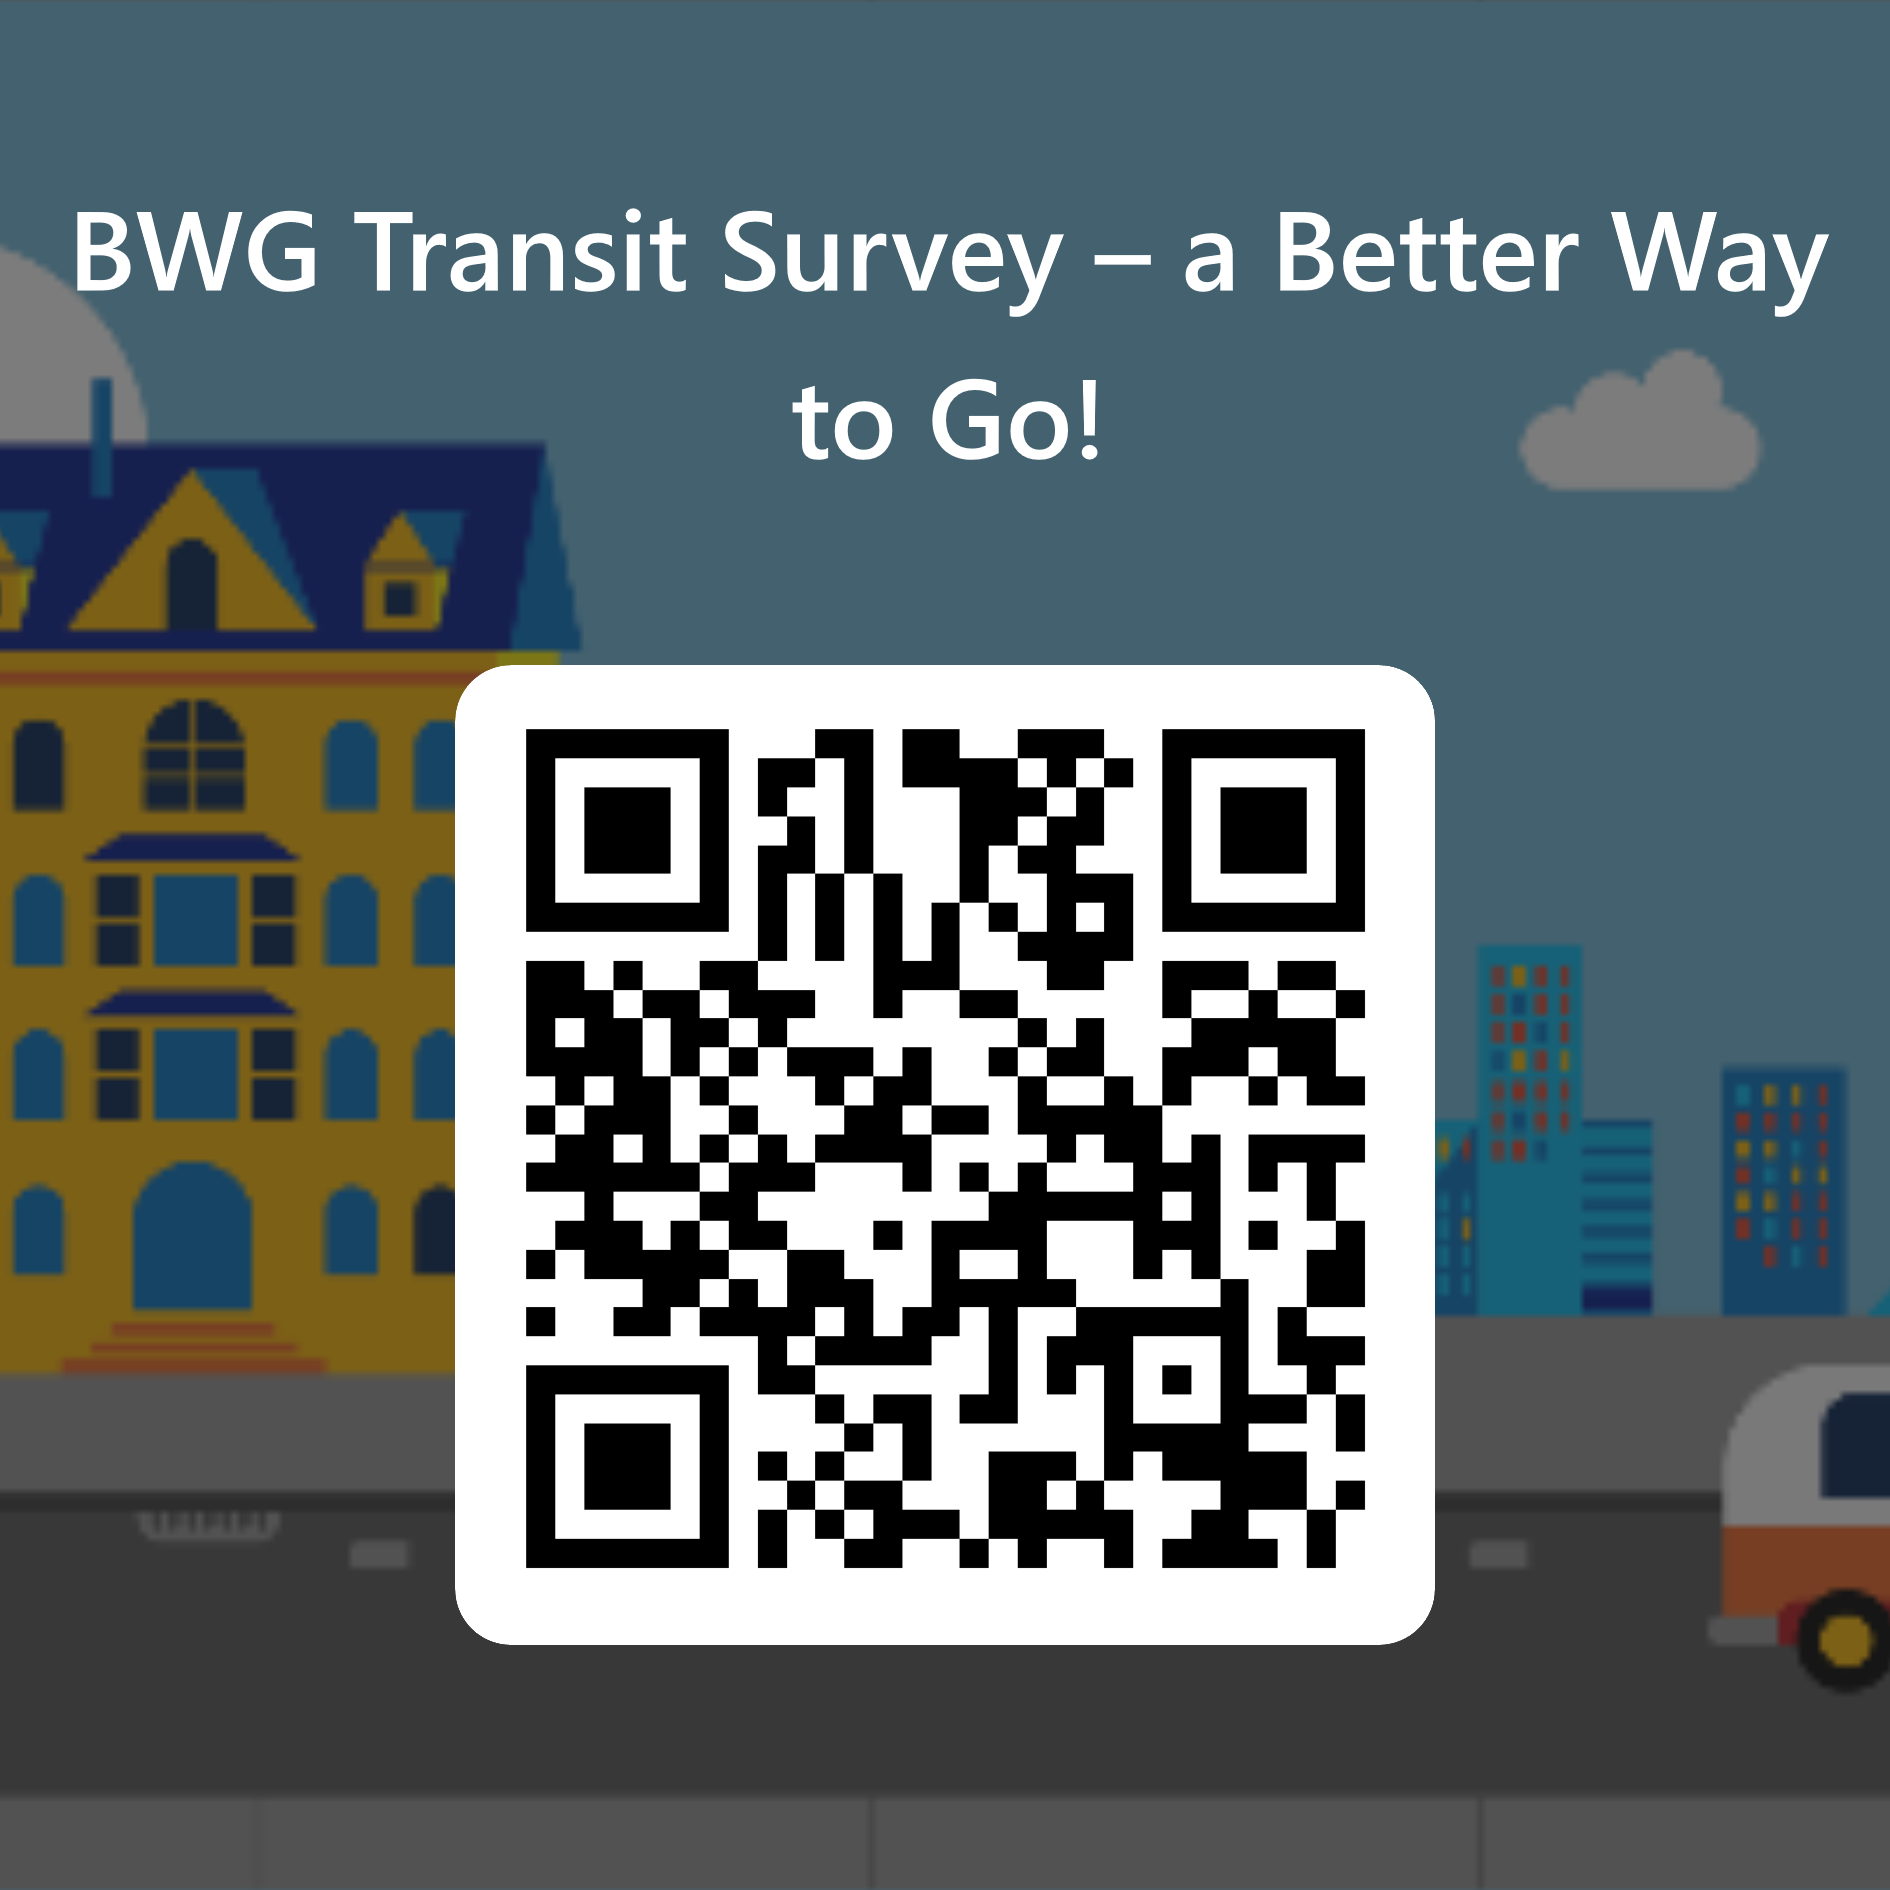 Illustration of city background along roadway with text reading "BWG Transit Survey - a better way to go", QR code included to the online survey